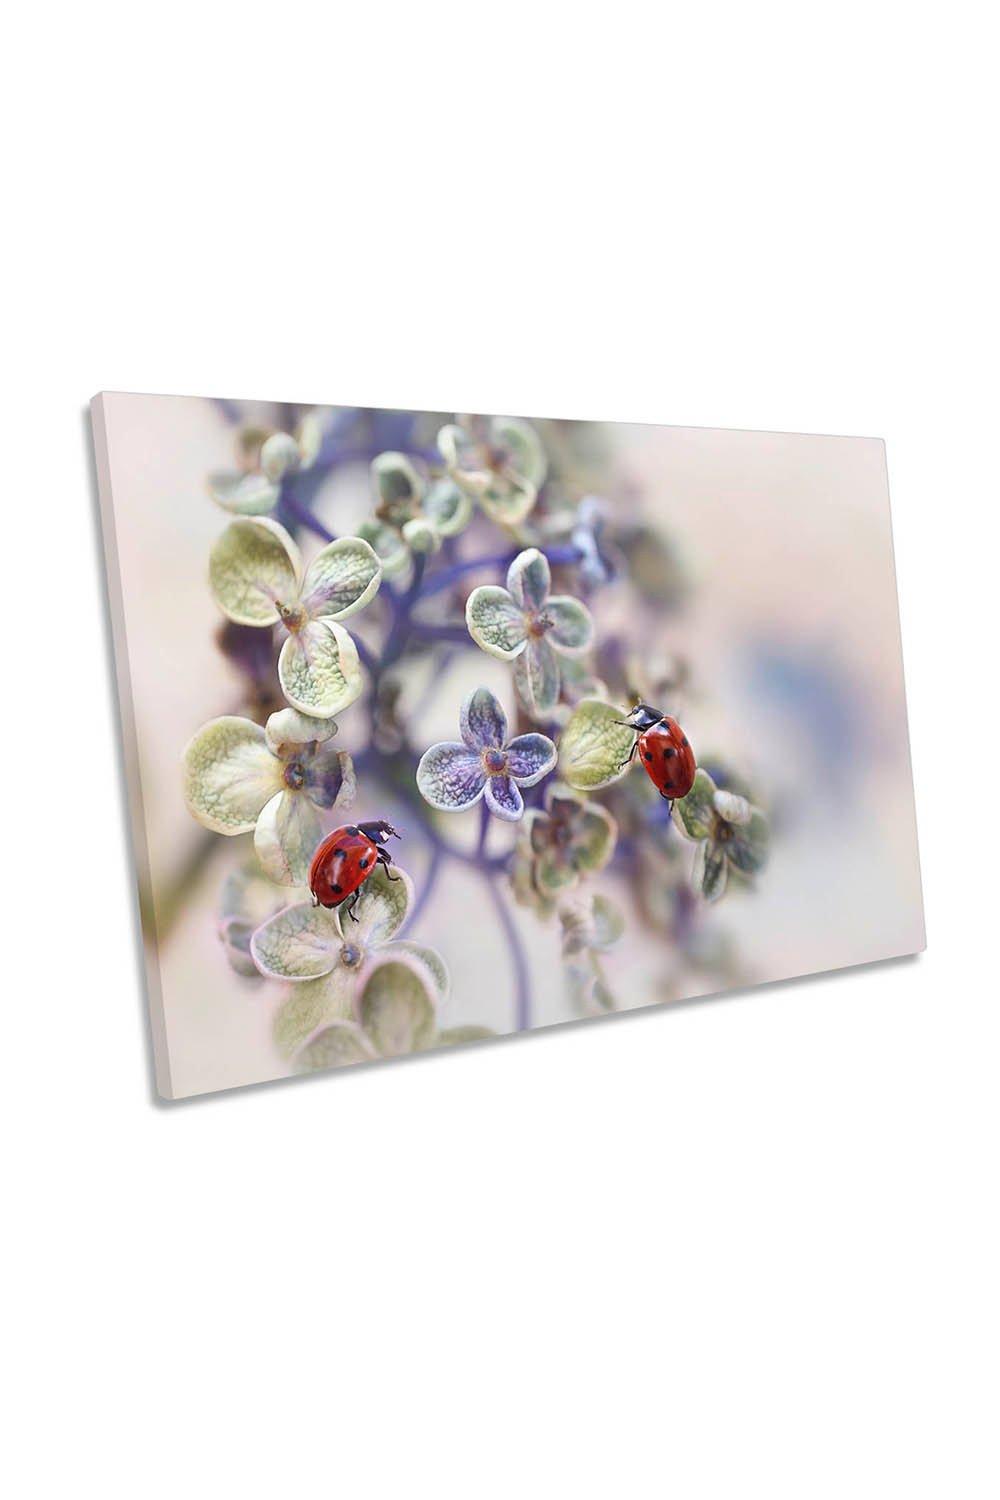 Fragile Ladybird Flowers Floral Canvas Wall Art Picture Print